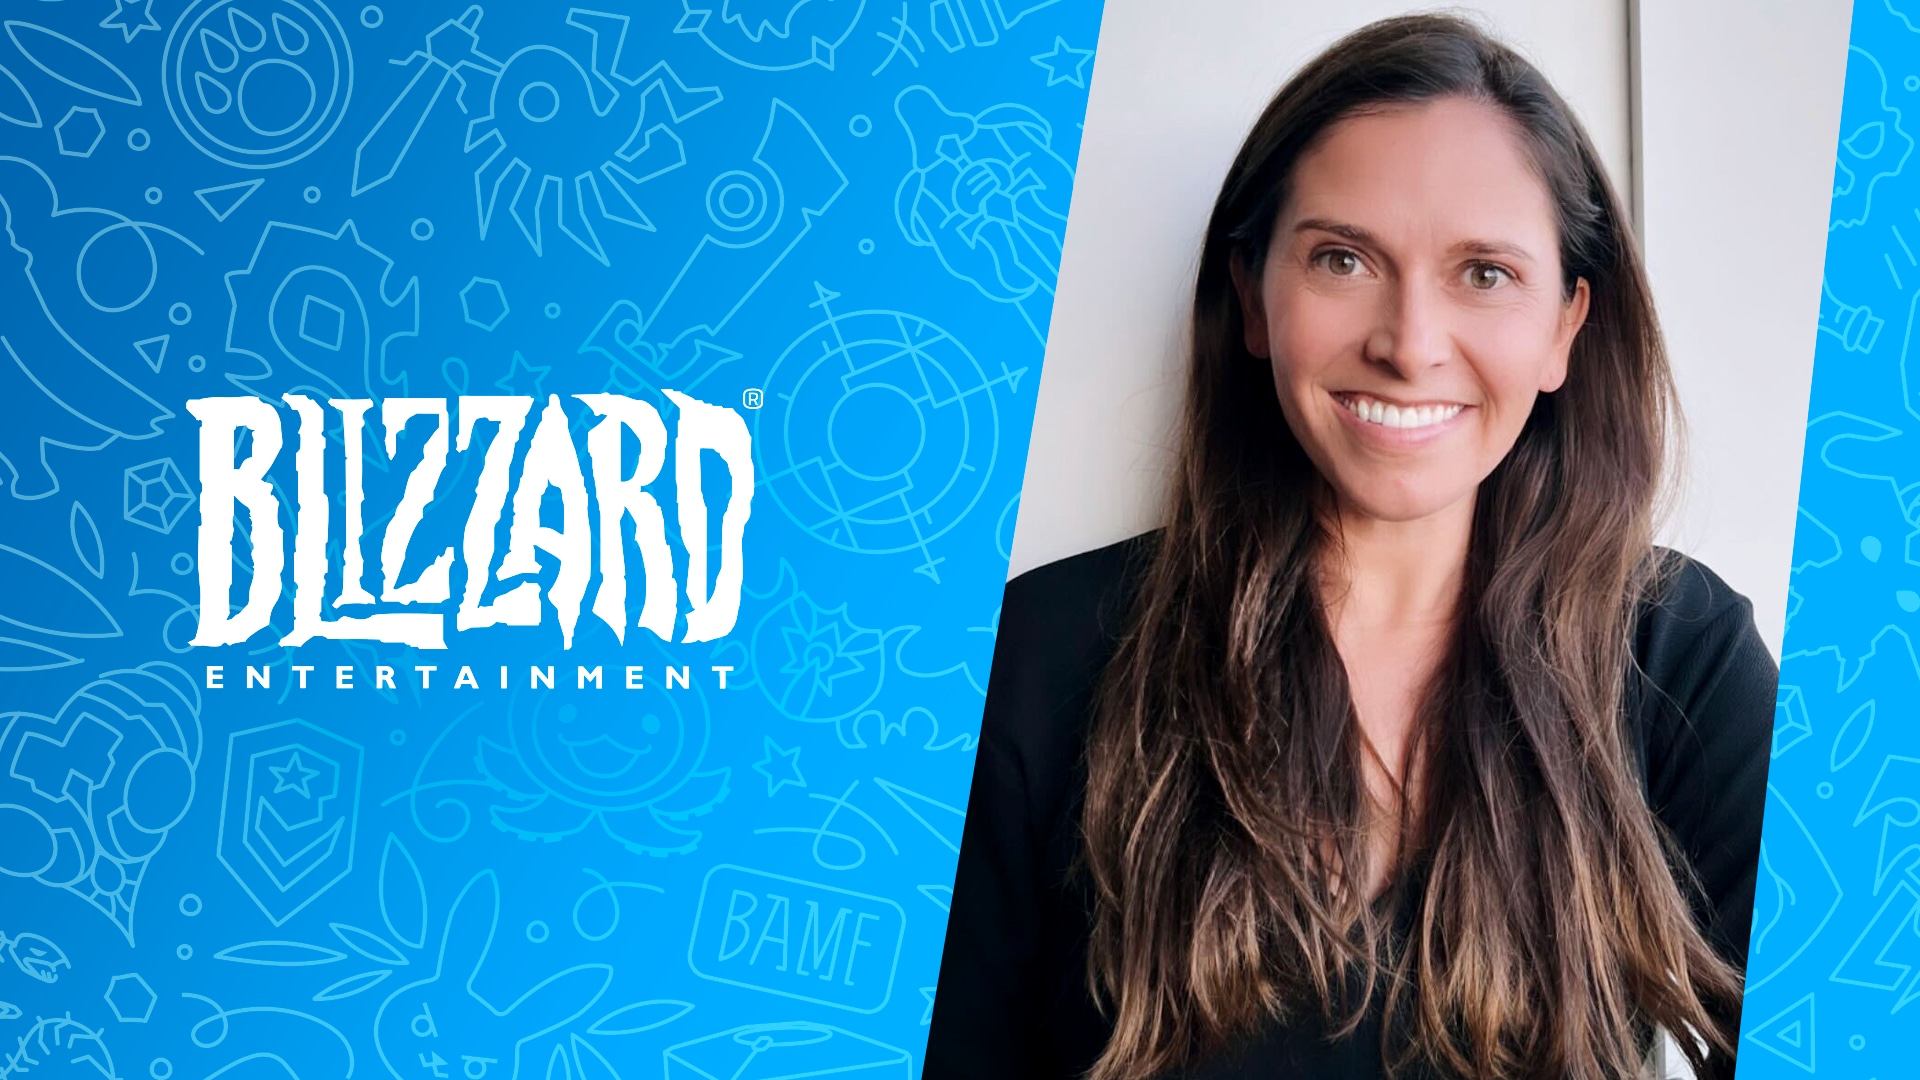 Blizzard Entertainment welcomes Jessica Martinez as VP of Culture